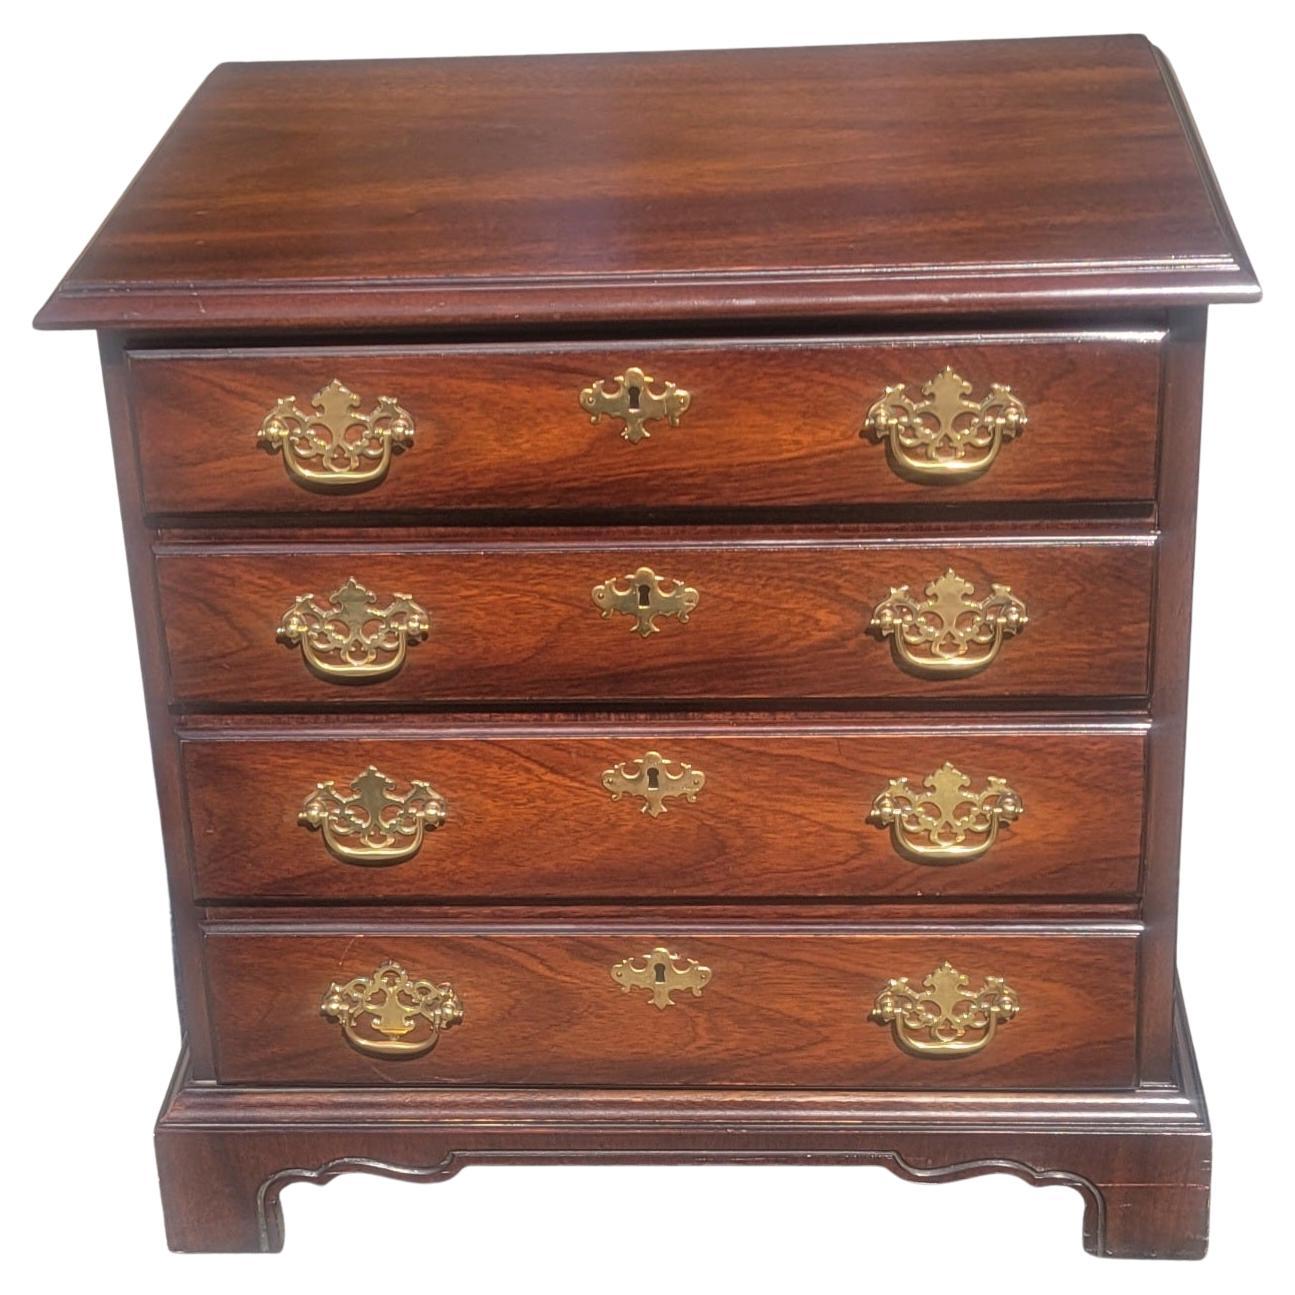 Drexel Bicentennial Chippendale Mahogany Four Drawers Bedside Chest of Drawers For Sale